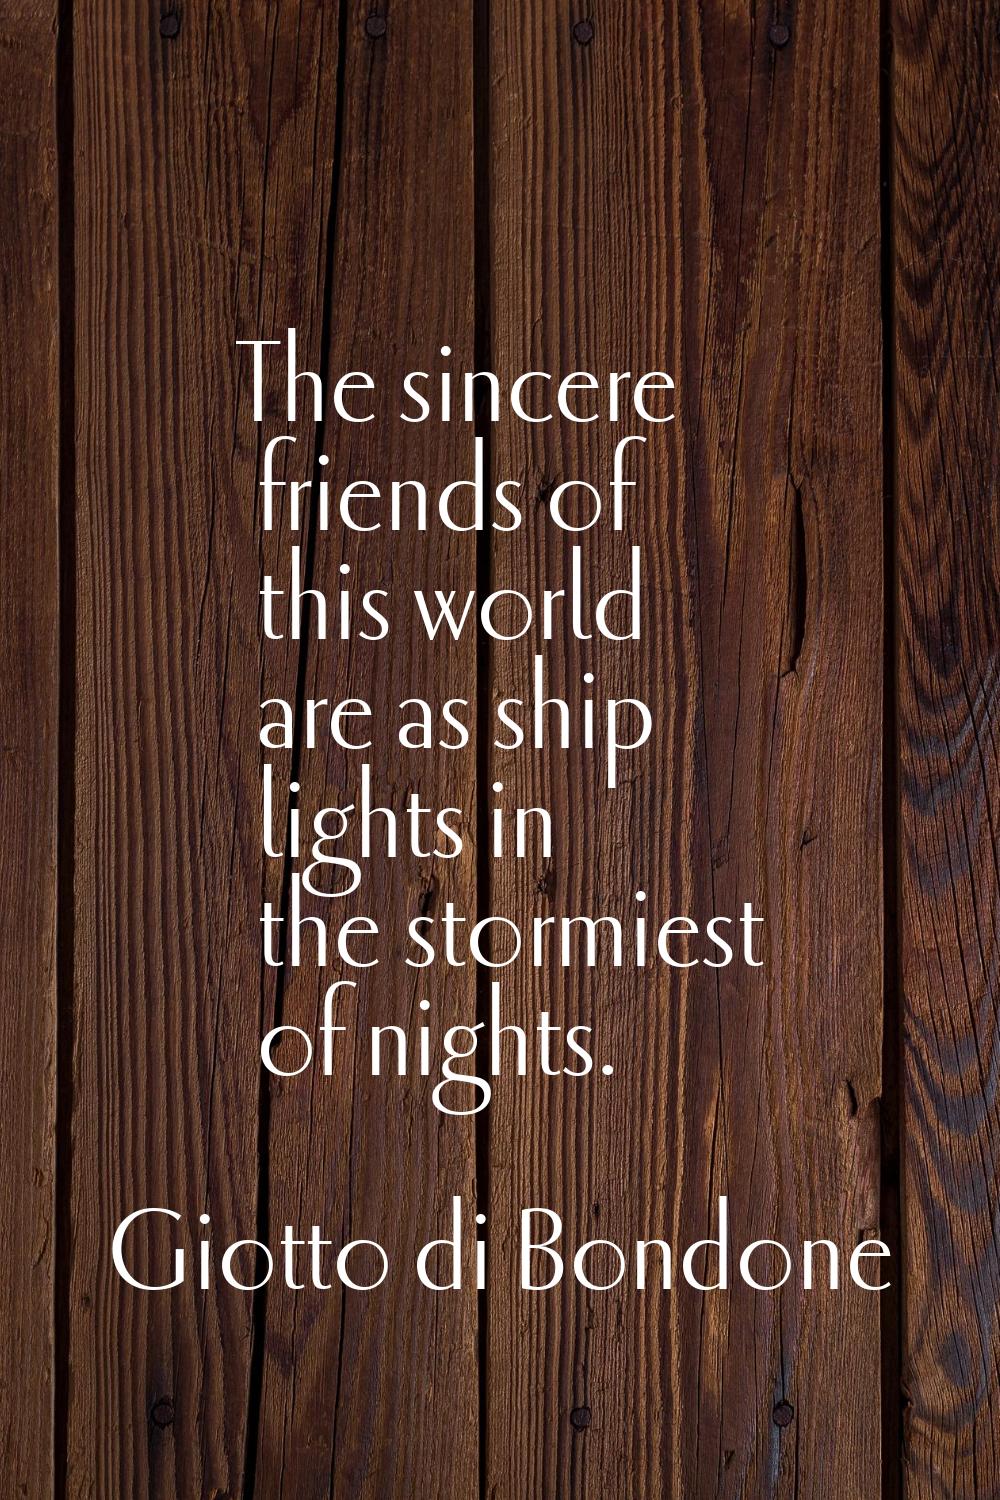 The sincere friends of this world are as ship lights in the stormiest of nights.